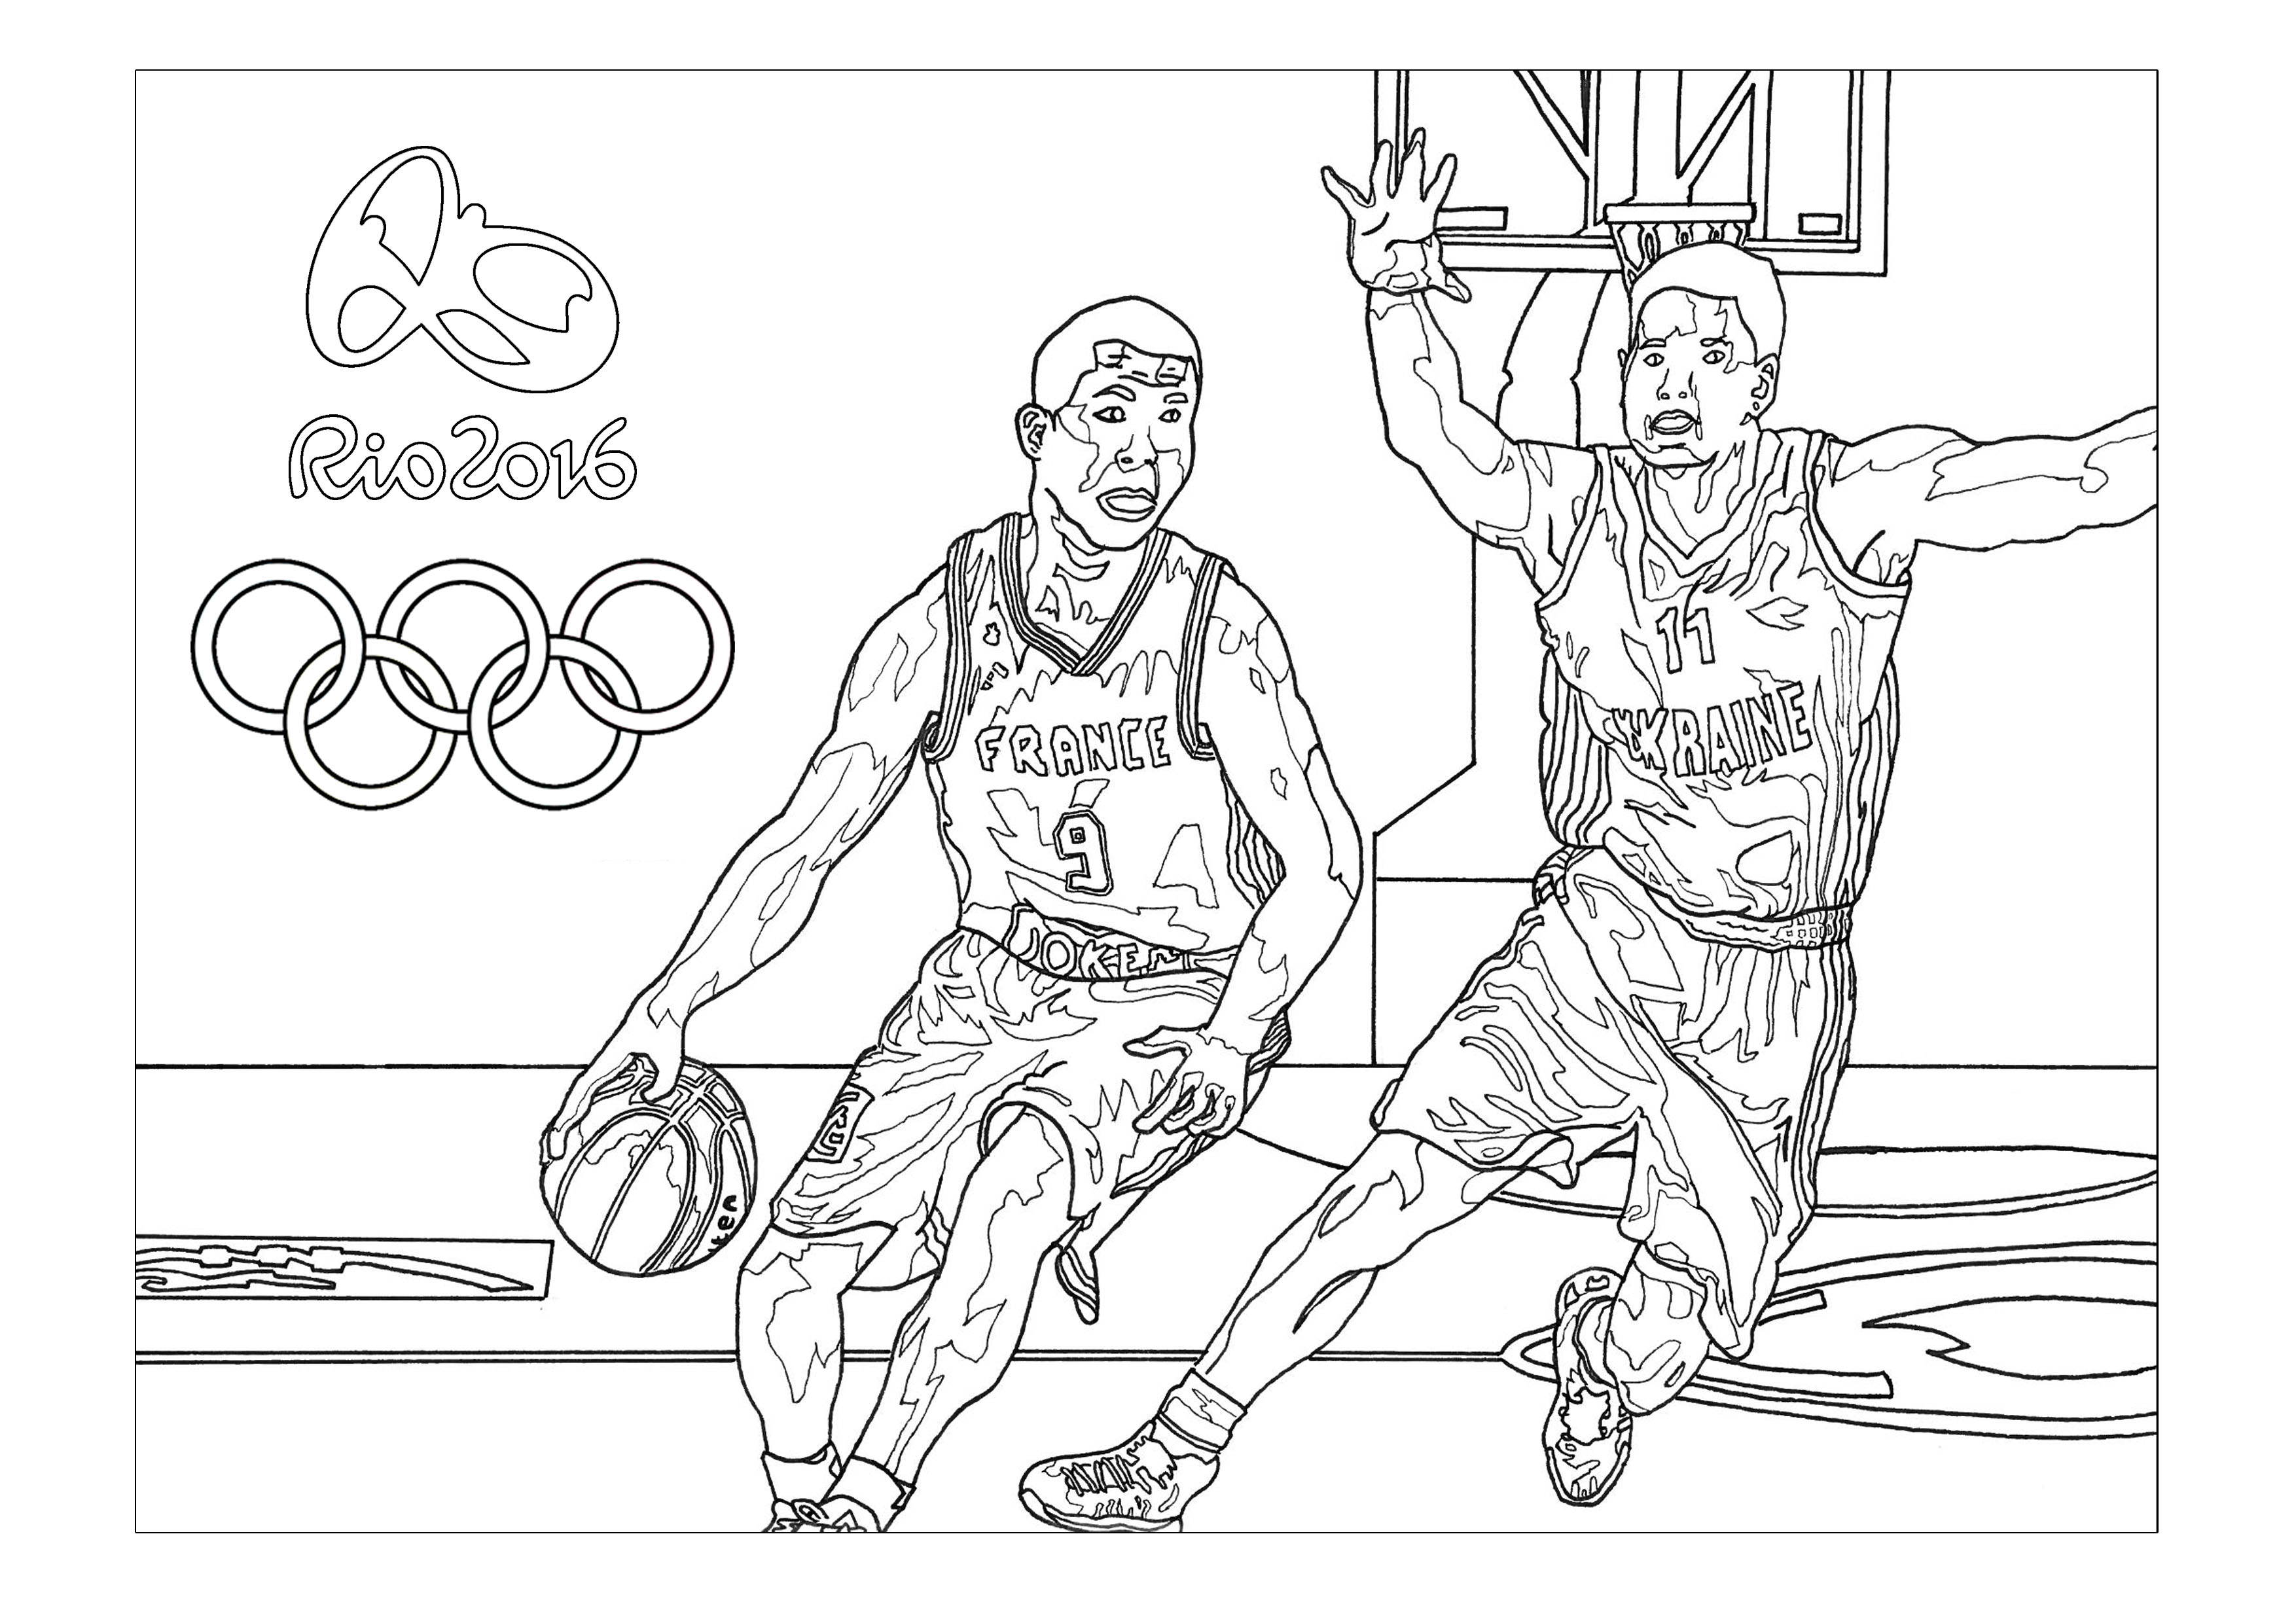 Olympic games for kids - Olympic Games Kids Coloring Pages